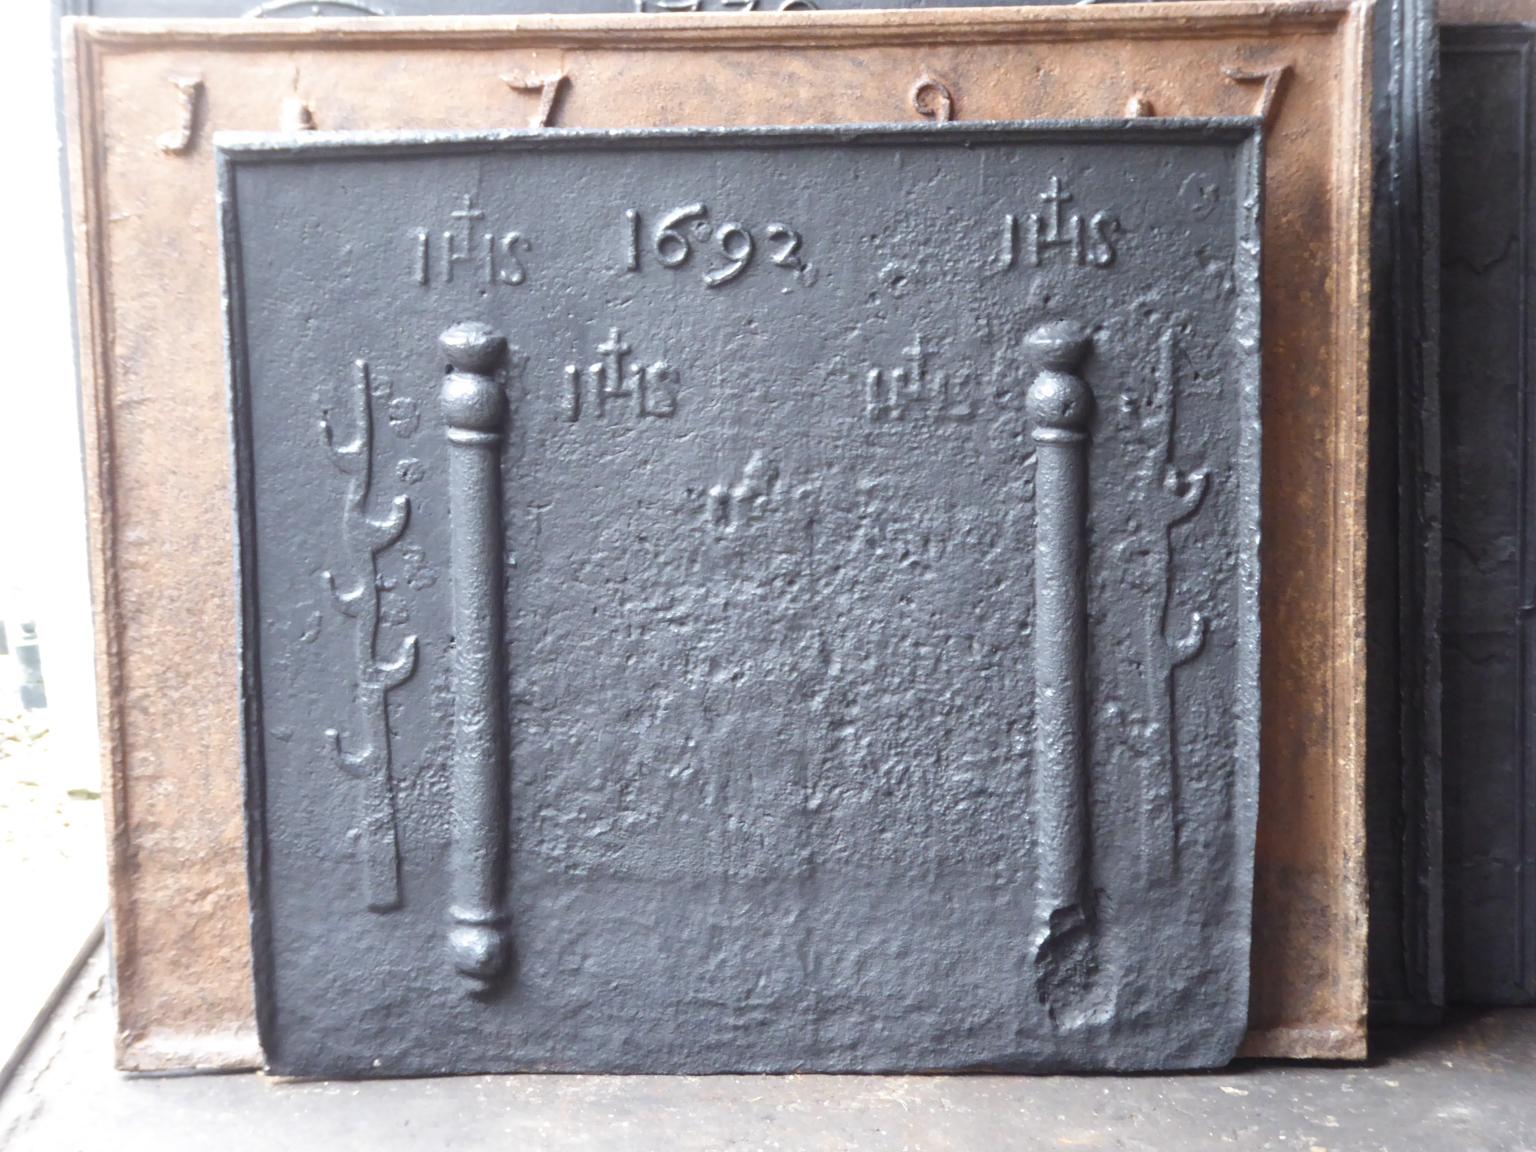 17th century Louis XIV French fireback with pillars, three IHS monograms, and the date of production 1692.

The monograms IHS stand for Iesus Hominum Salvator (Jesus the Savior of Humanity) or In Hoc Signo (In this sign will you win). The pillars